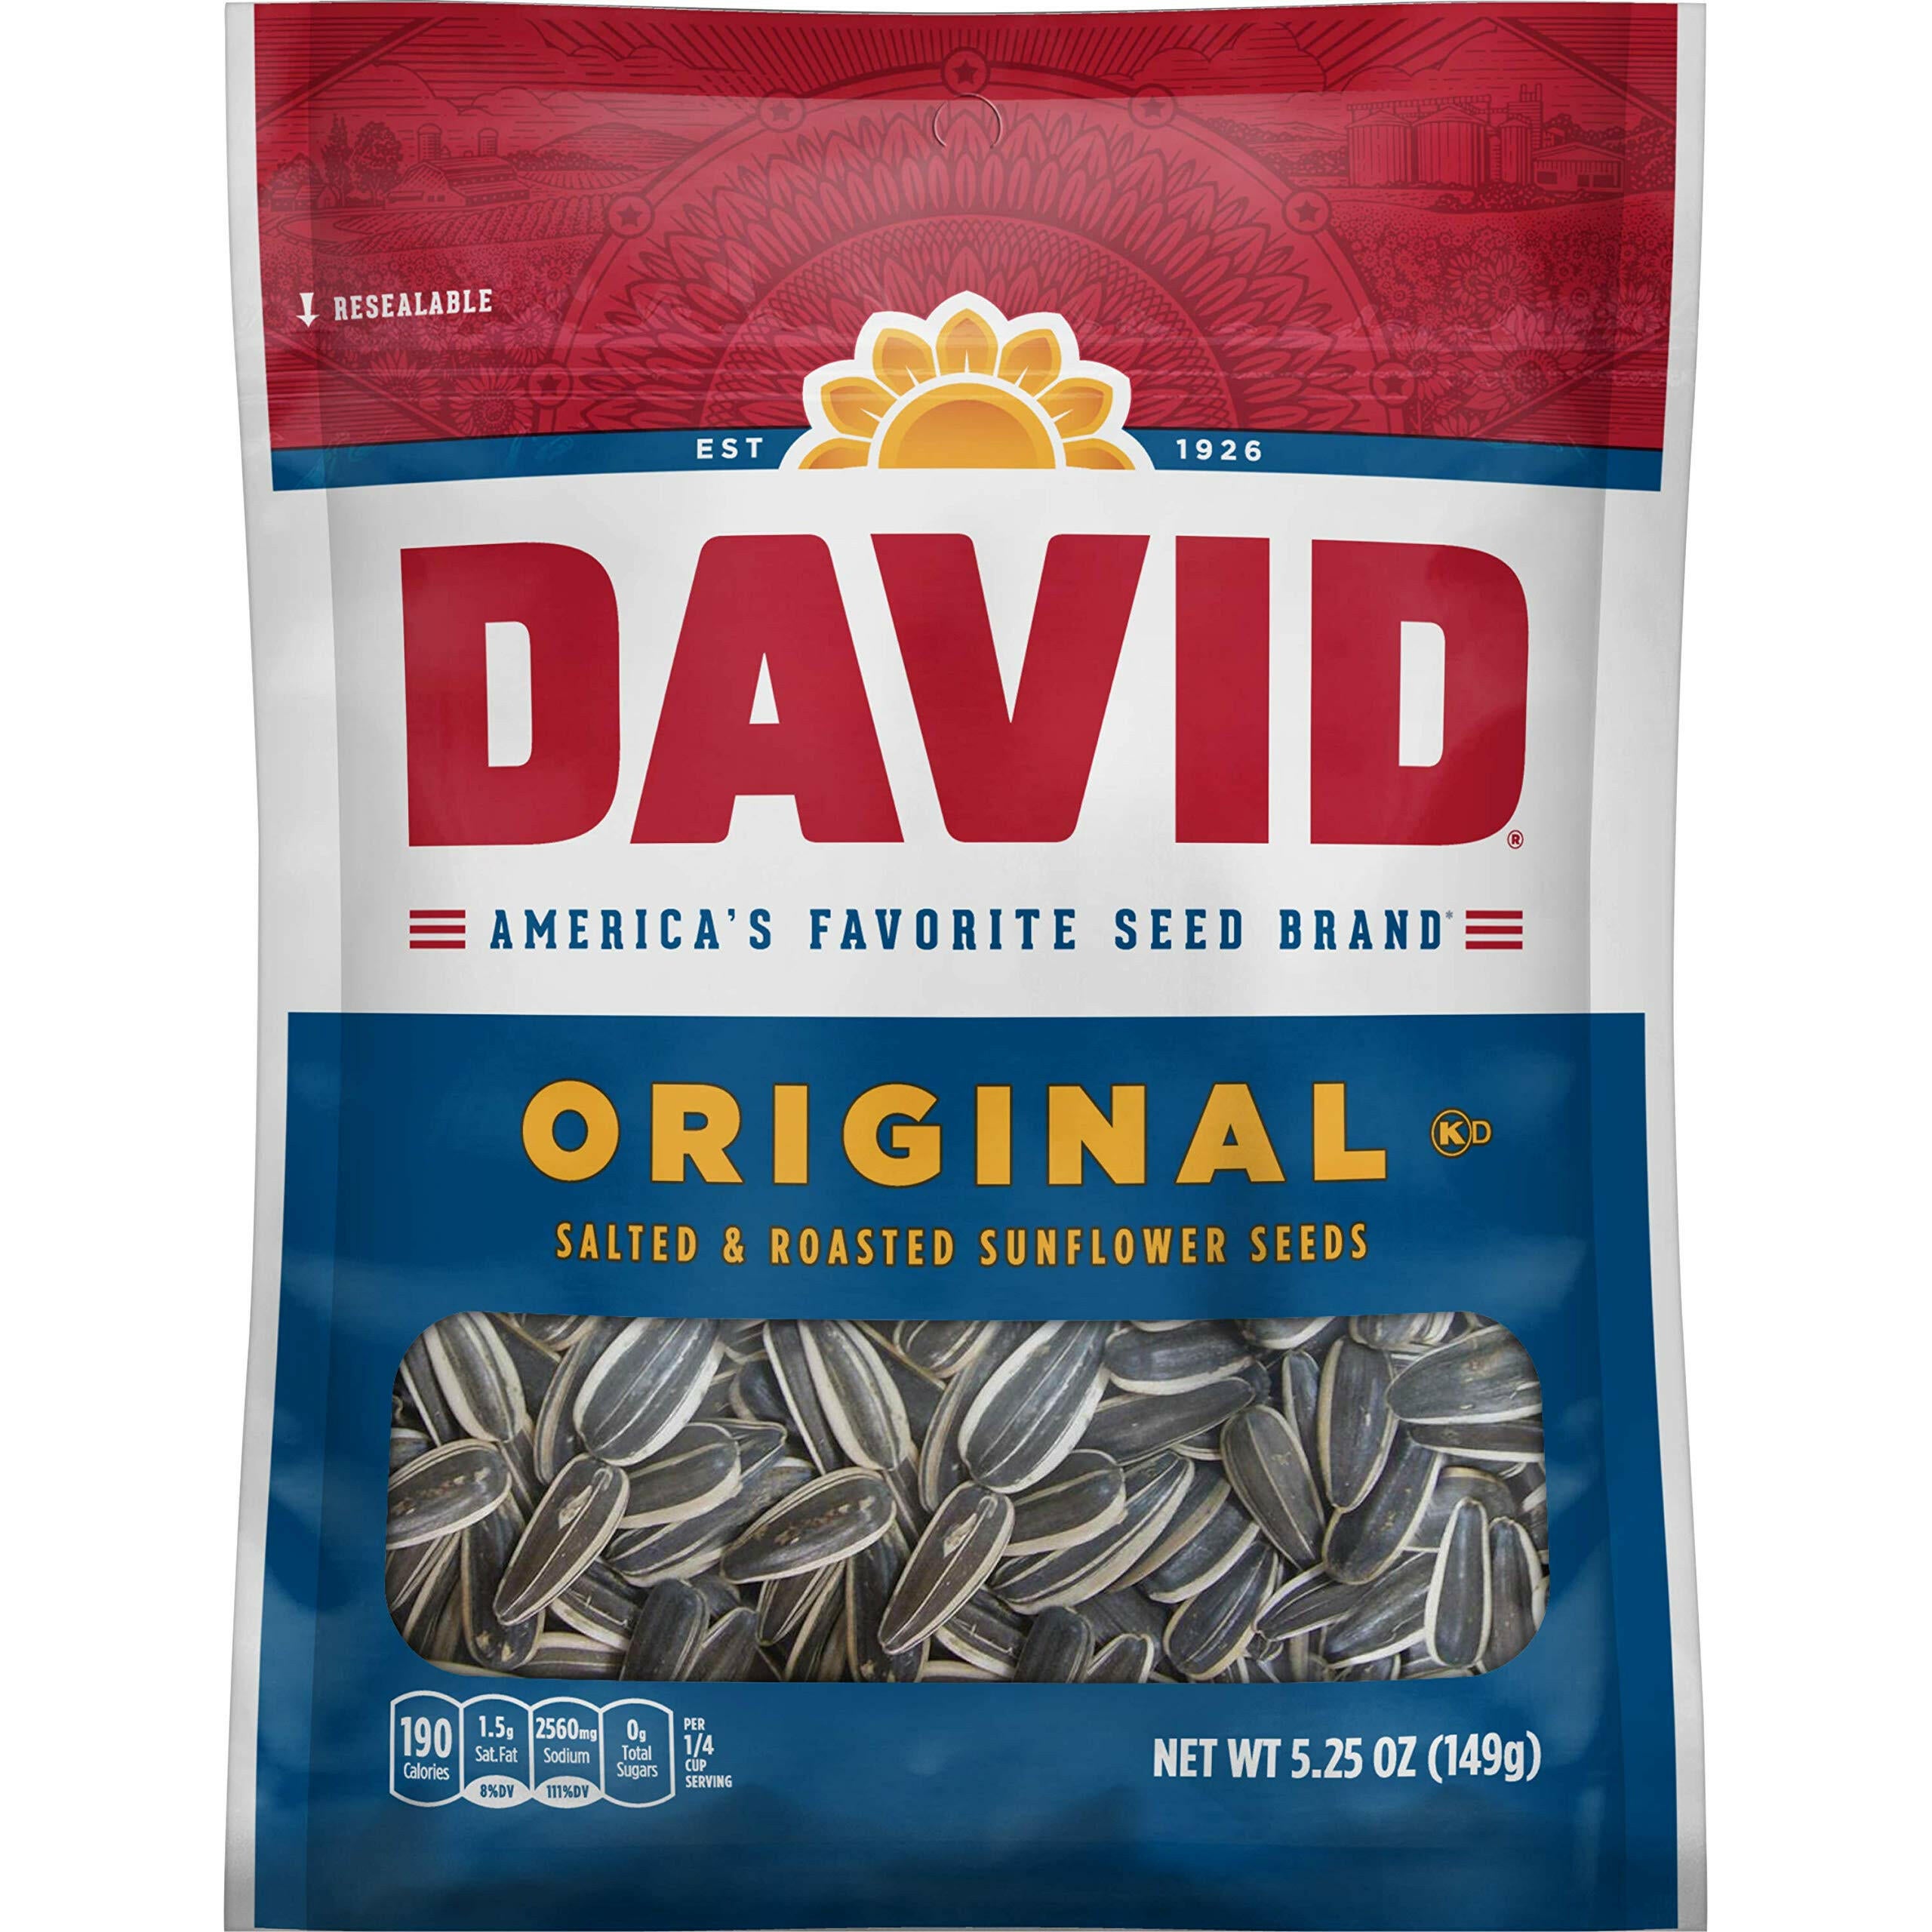 2 Planters Mixed Nuts Less Than 50%, 10.3 oz + 1 David's Original Jumbo Sunflower Seeds 5.25oz + Bowl as a gift.